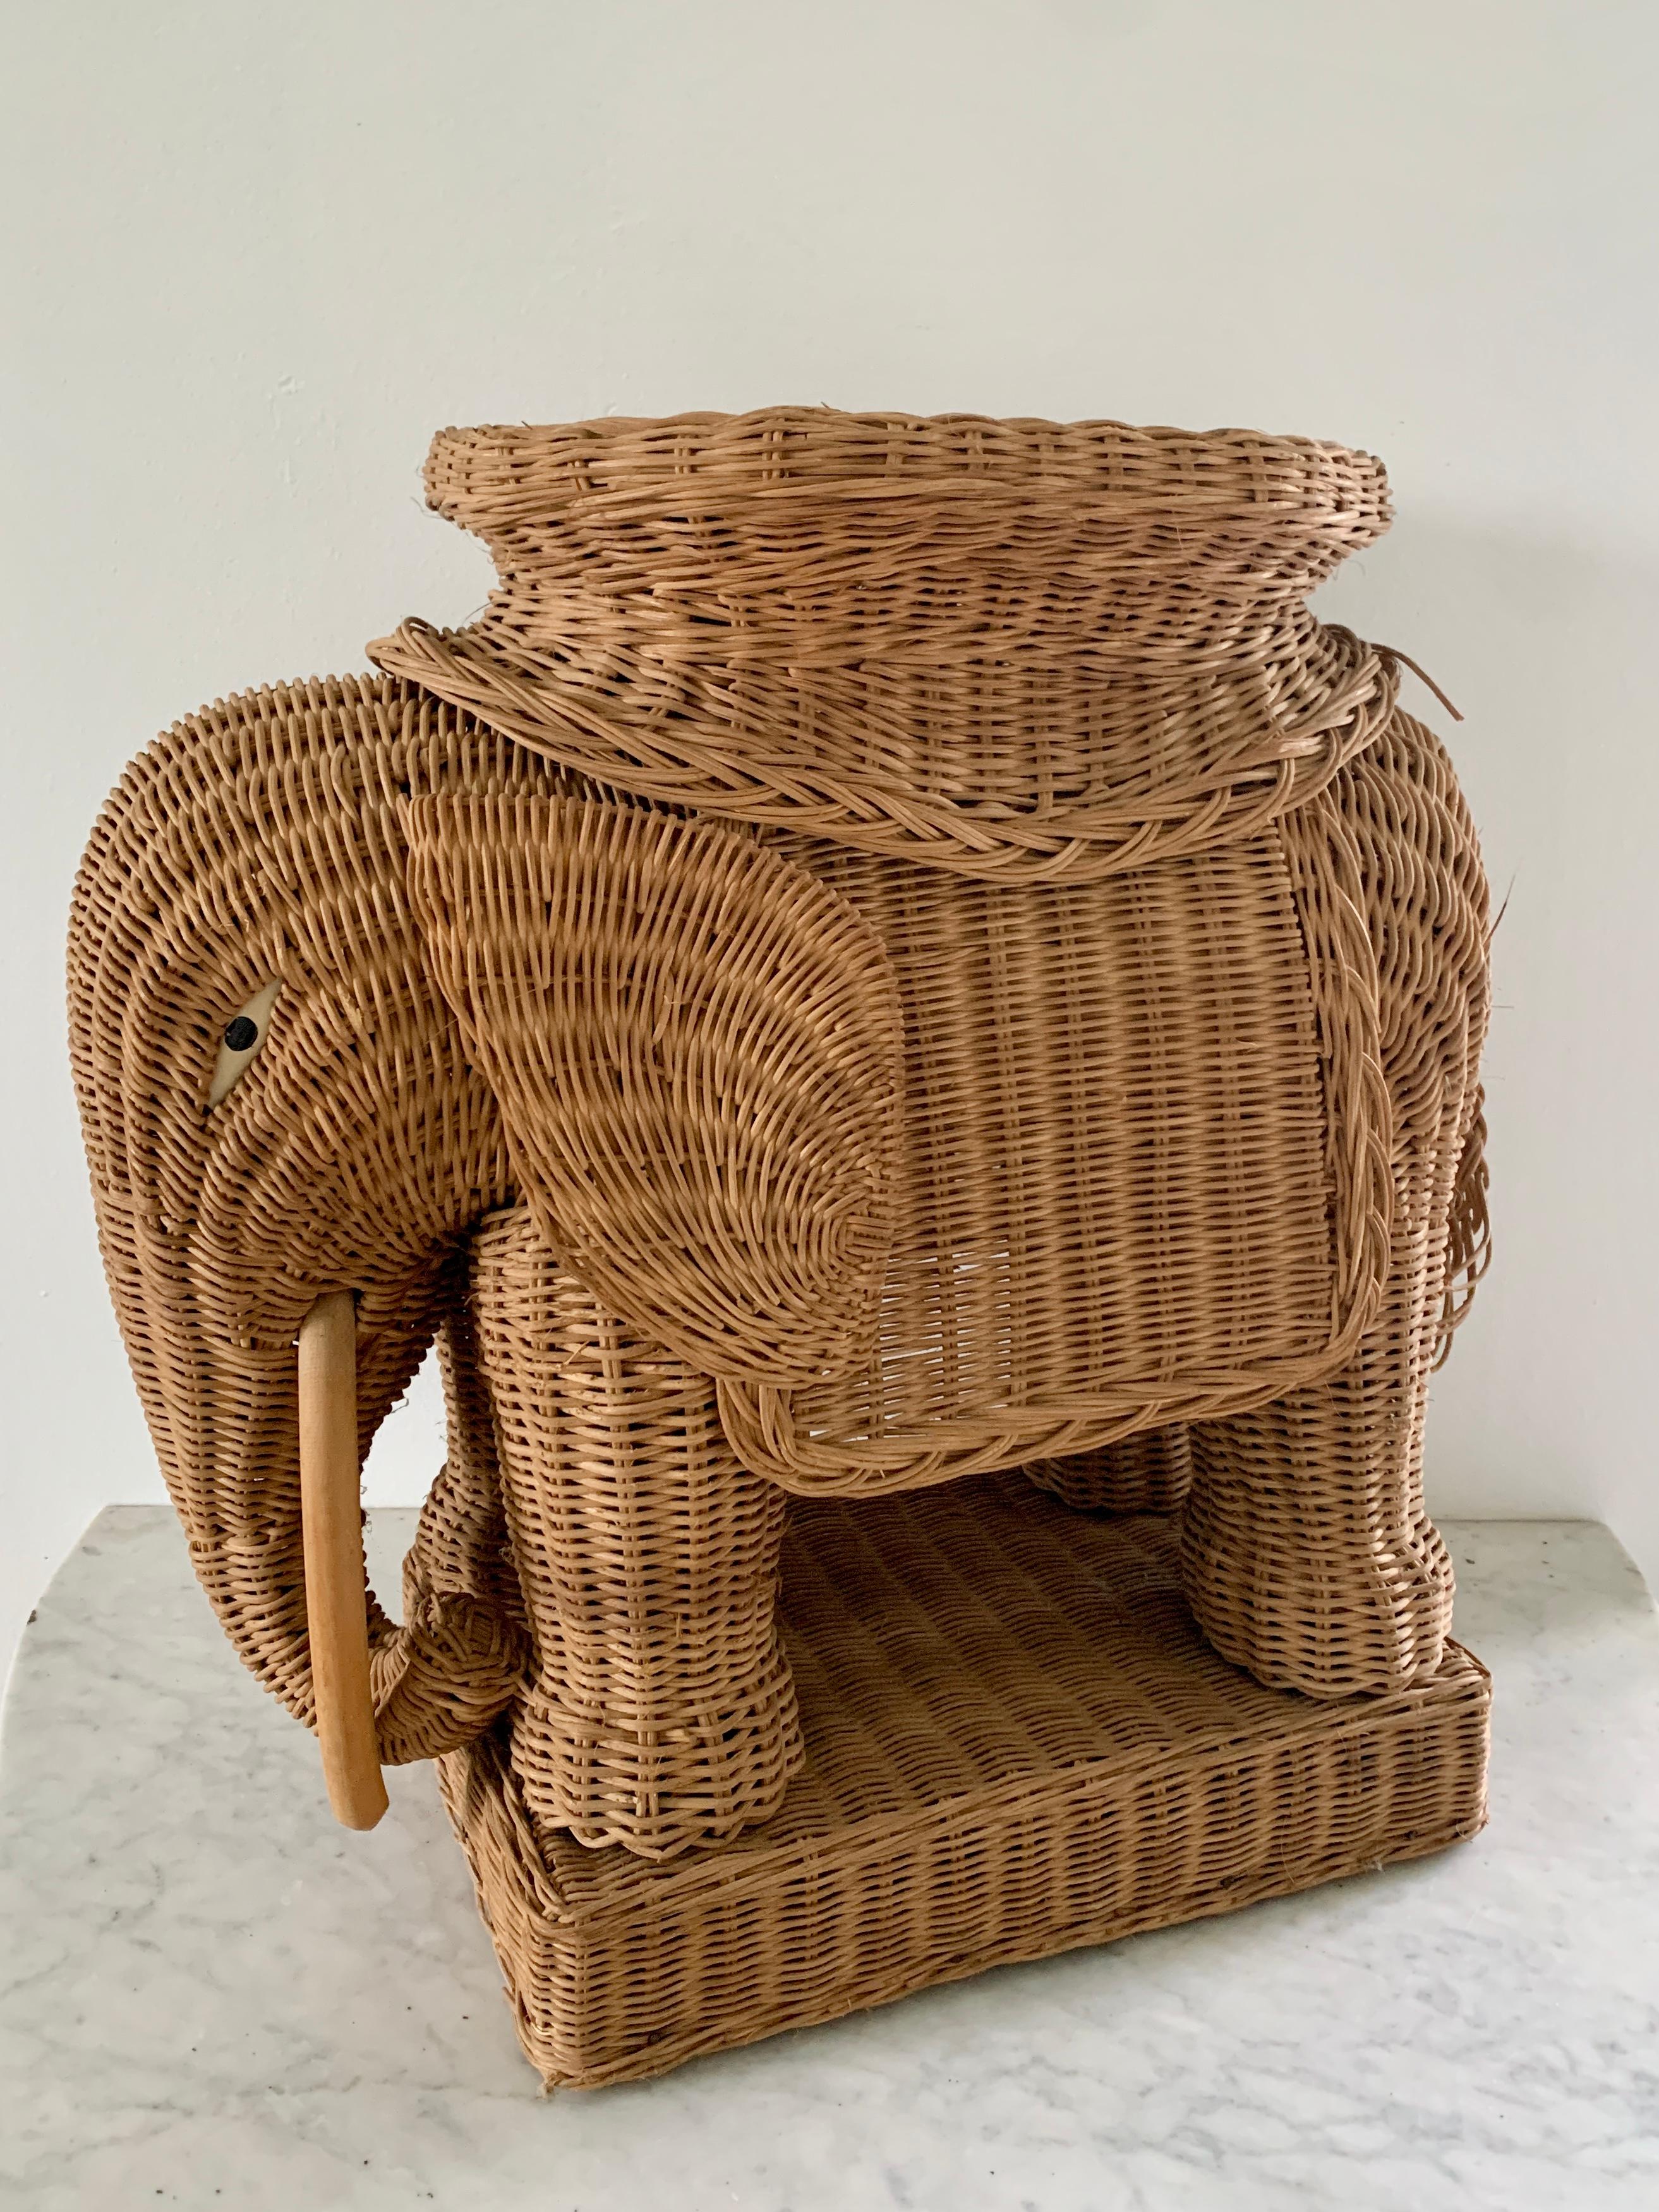 A charming Mid-Century wicker rattan elephant garden stool or side table

USA, Circa 1970s

Measures: 21